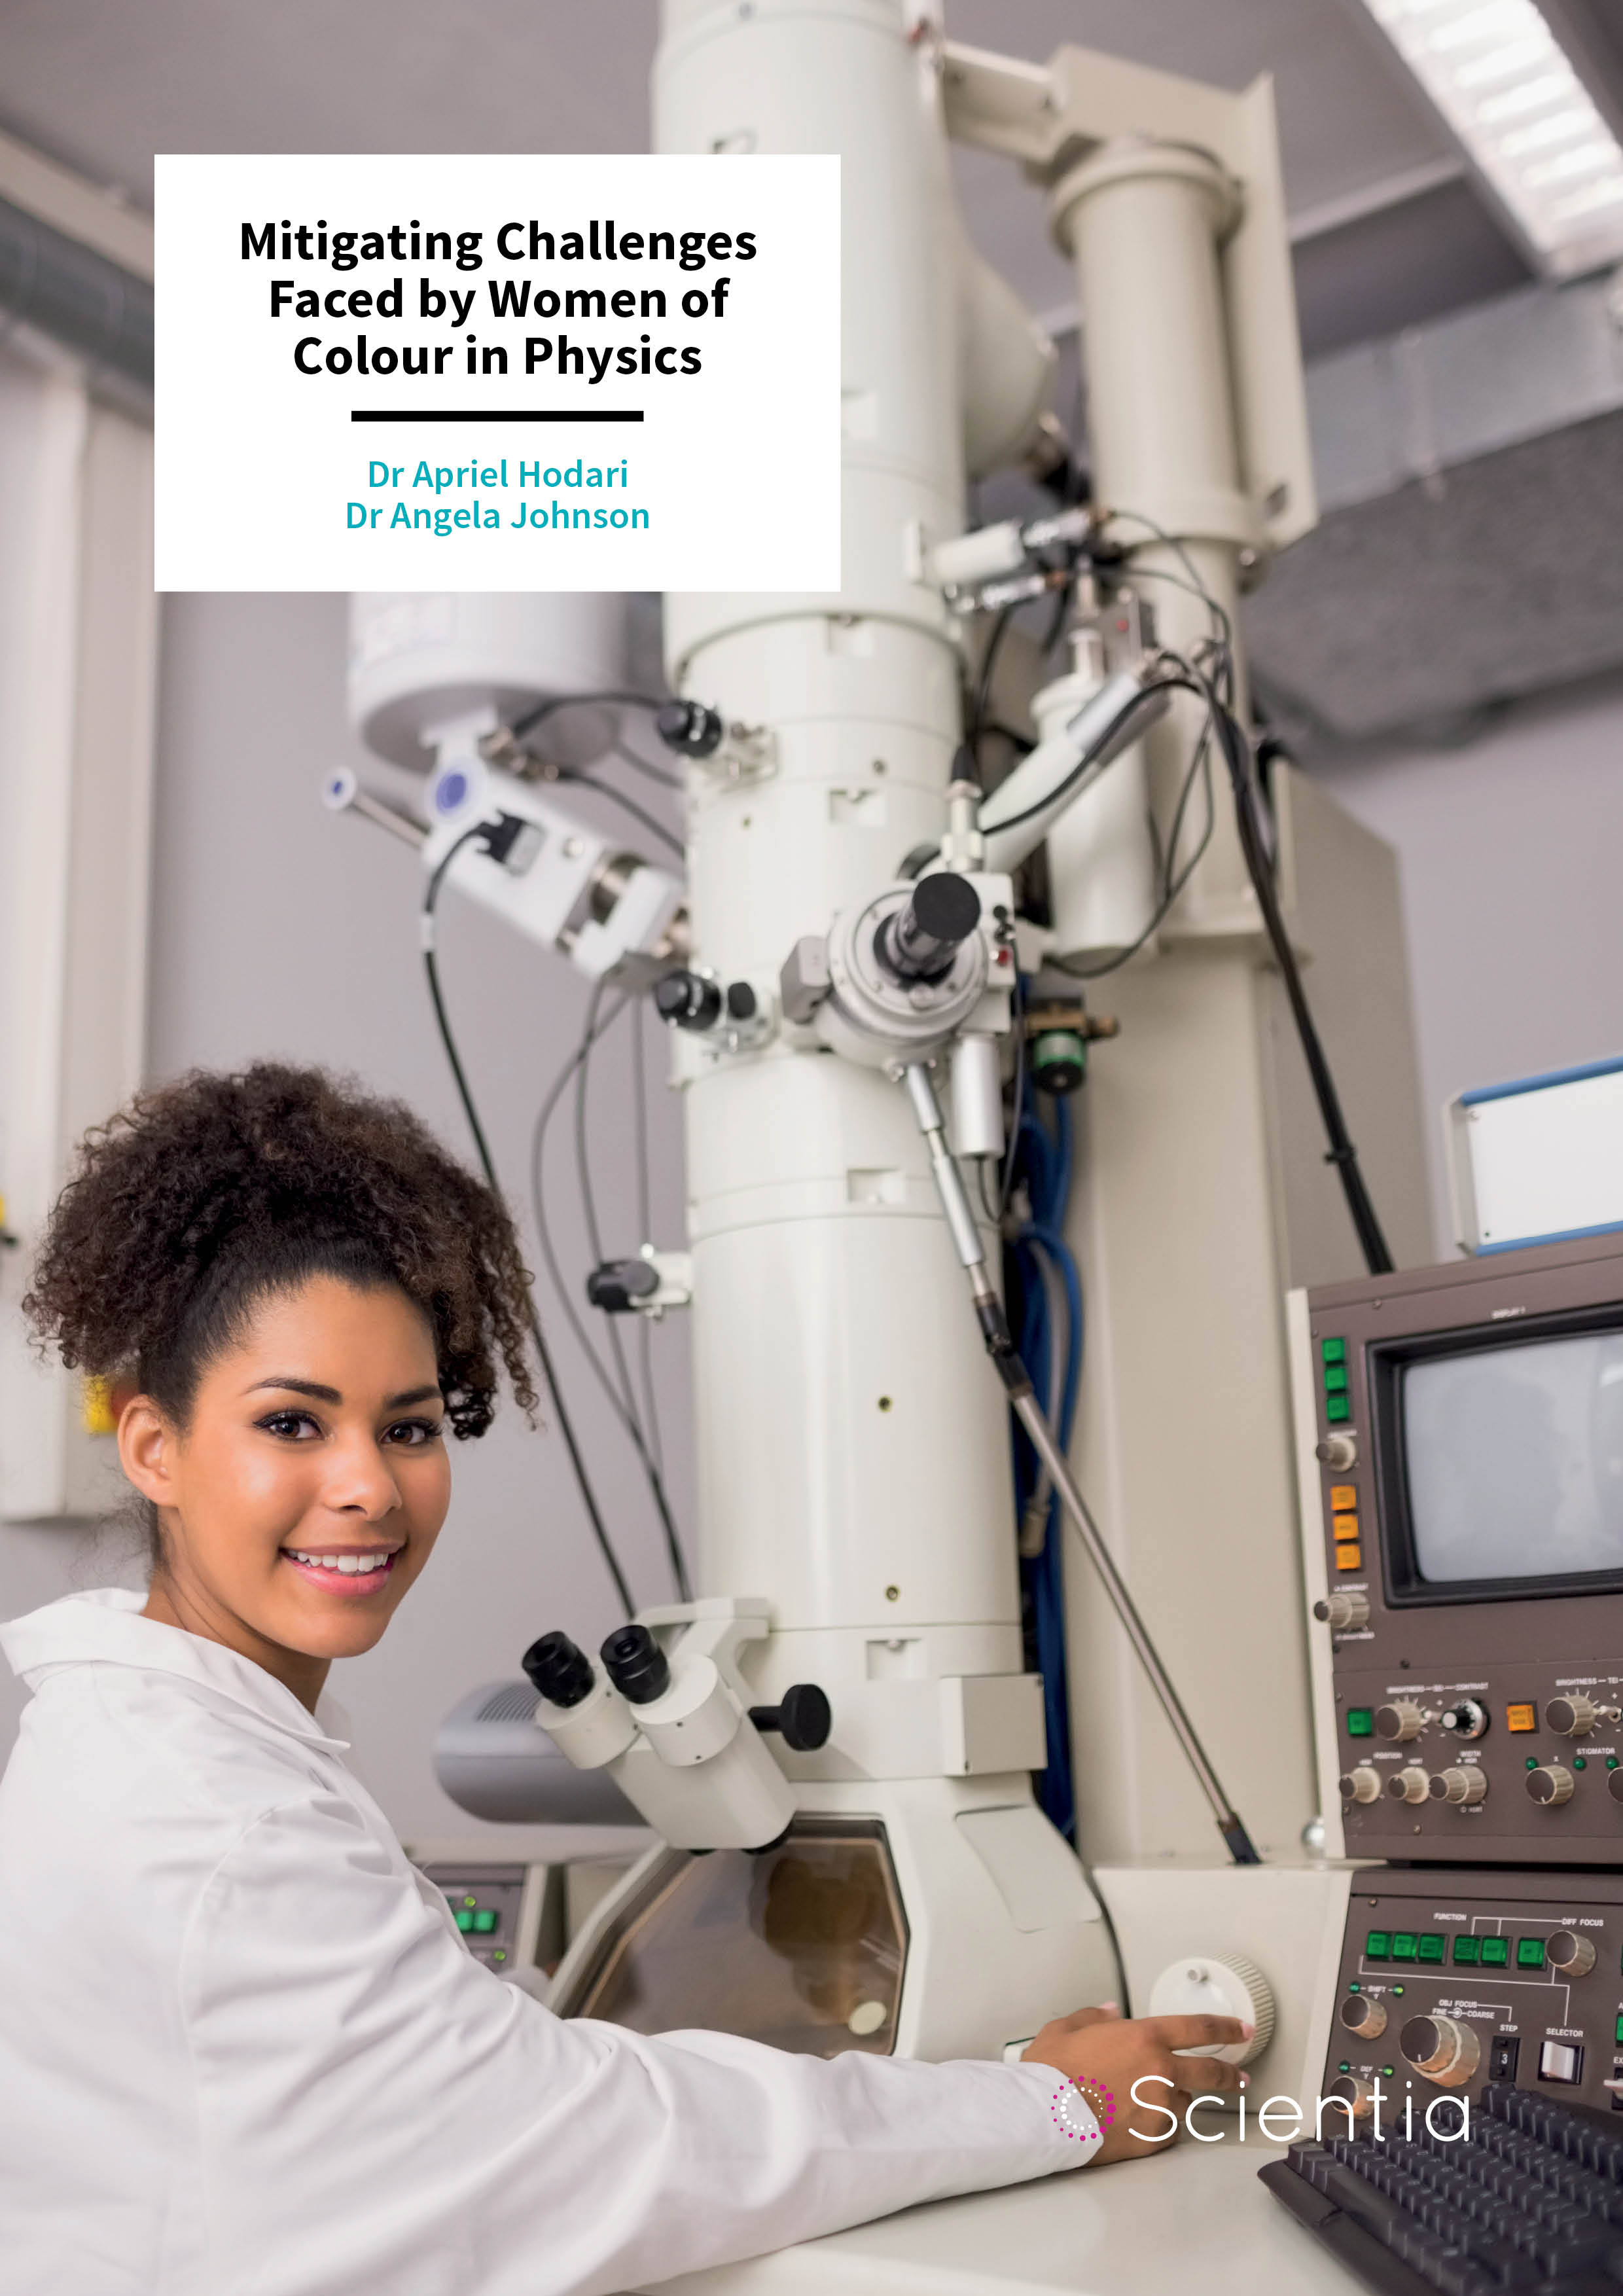 Dr Apriel Hodari | Dr Angela Johnson – Mitigating Challenges Faced by Women of Colour in Physics